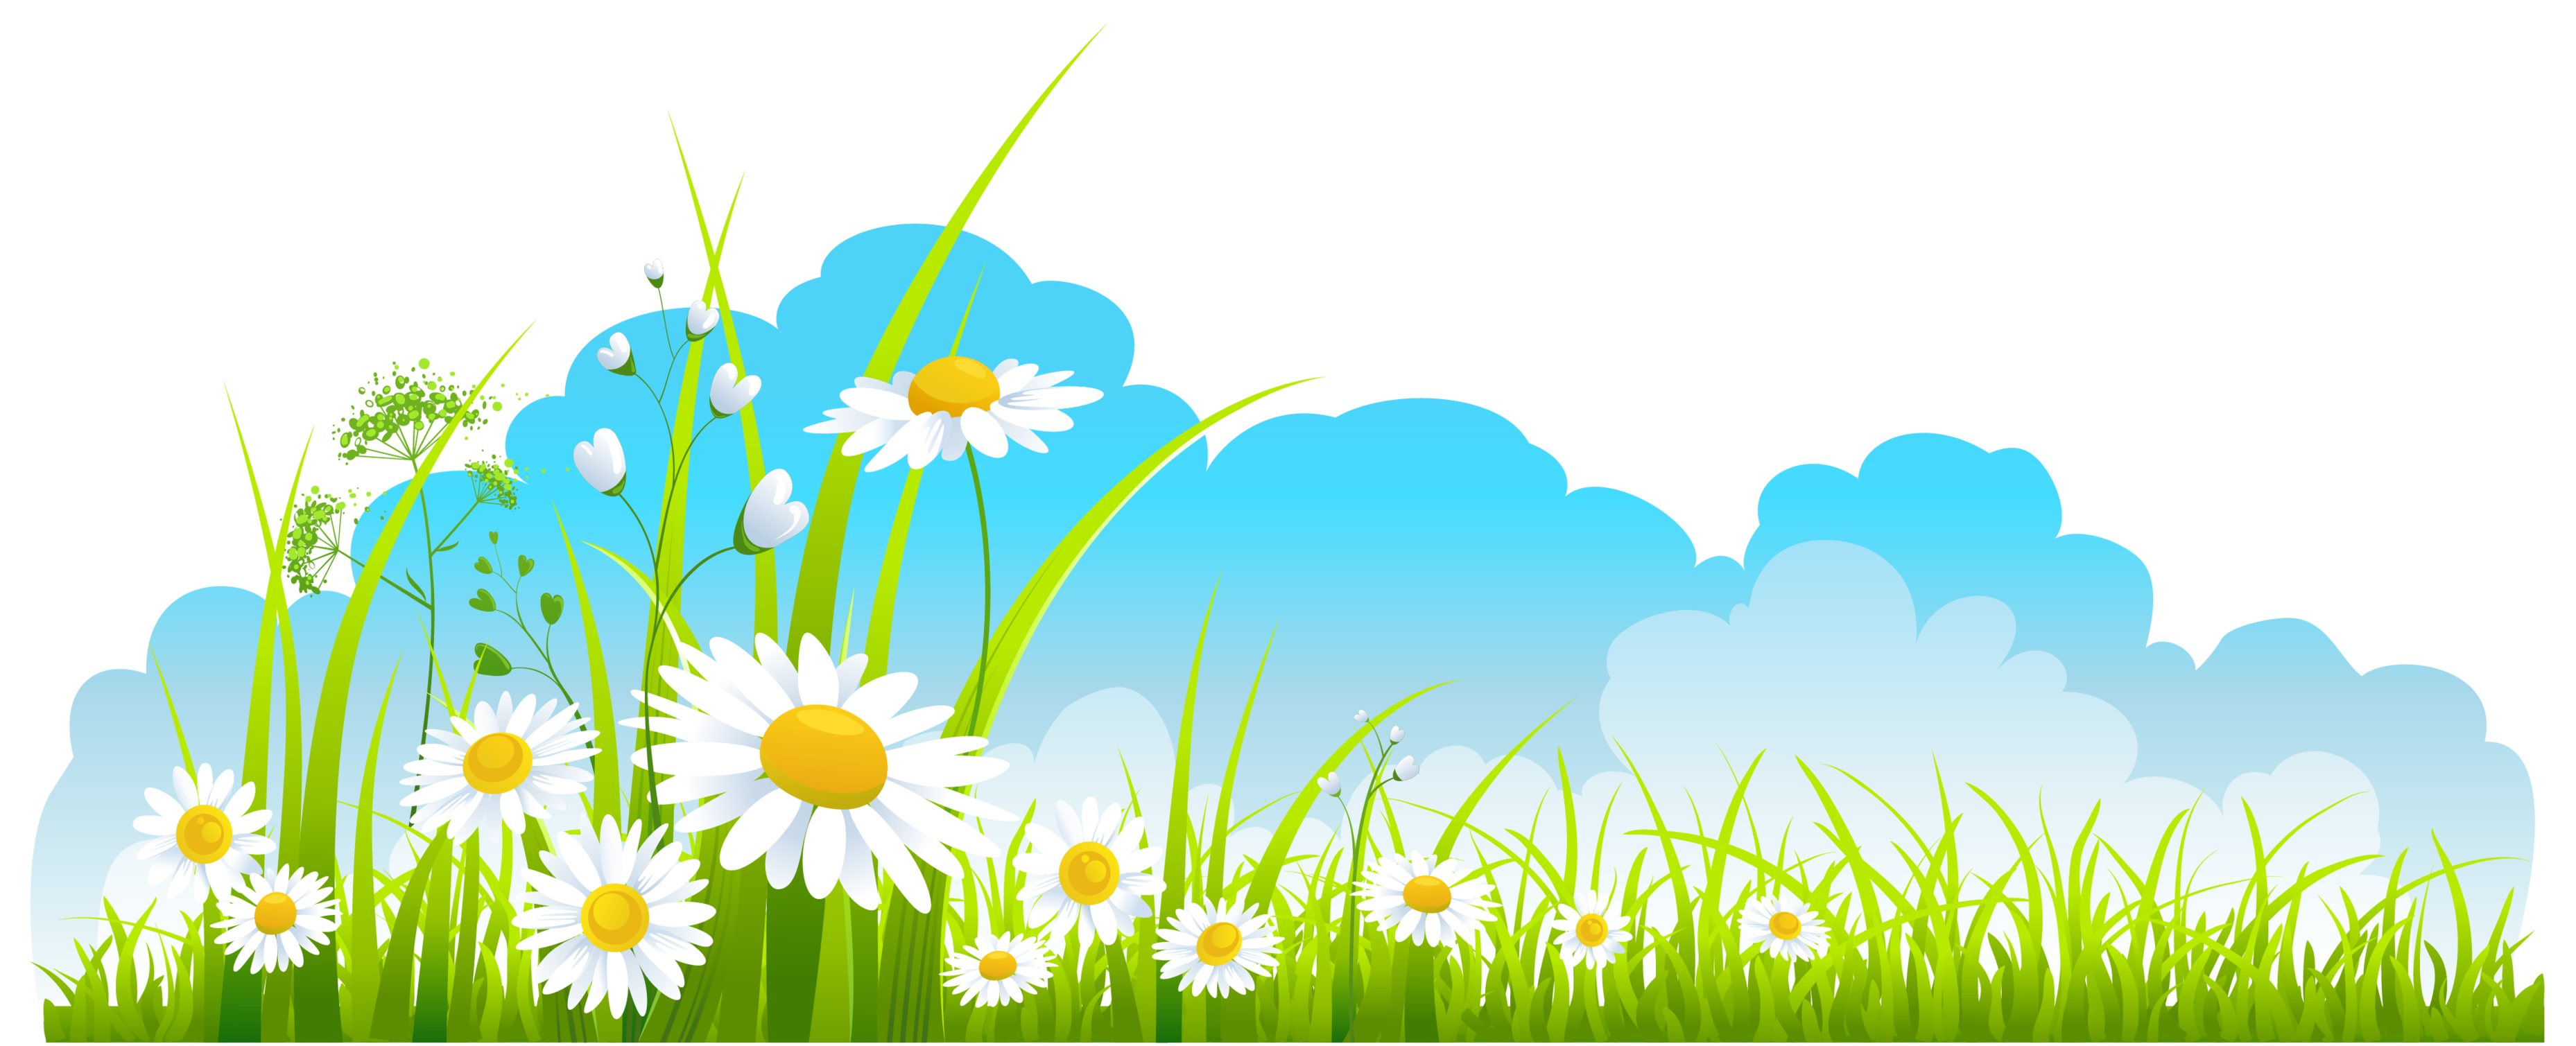 Spring Clipart & Spring Clip Art Images.